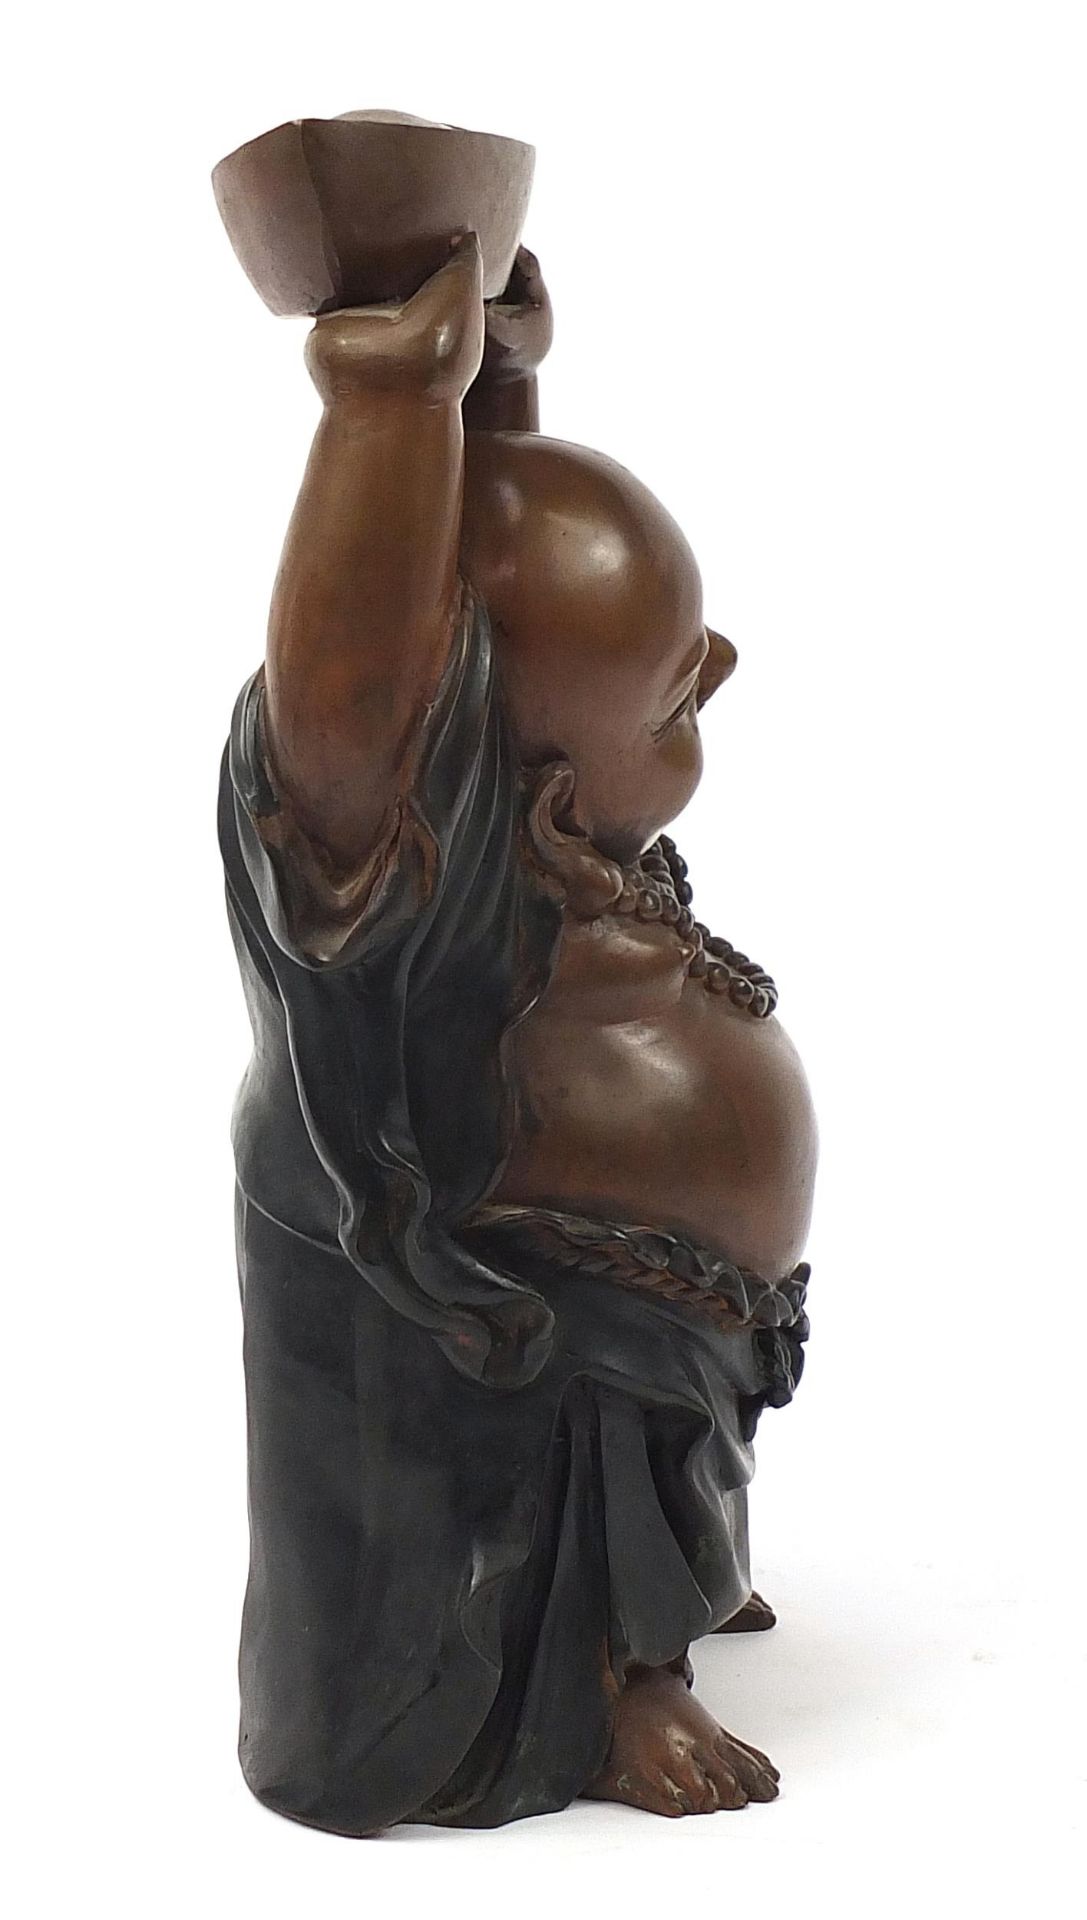 Large Chinese patinated bronze figure of Buddha with his hands above his head holding a vessel, 48cm - Image 4 of 6